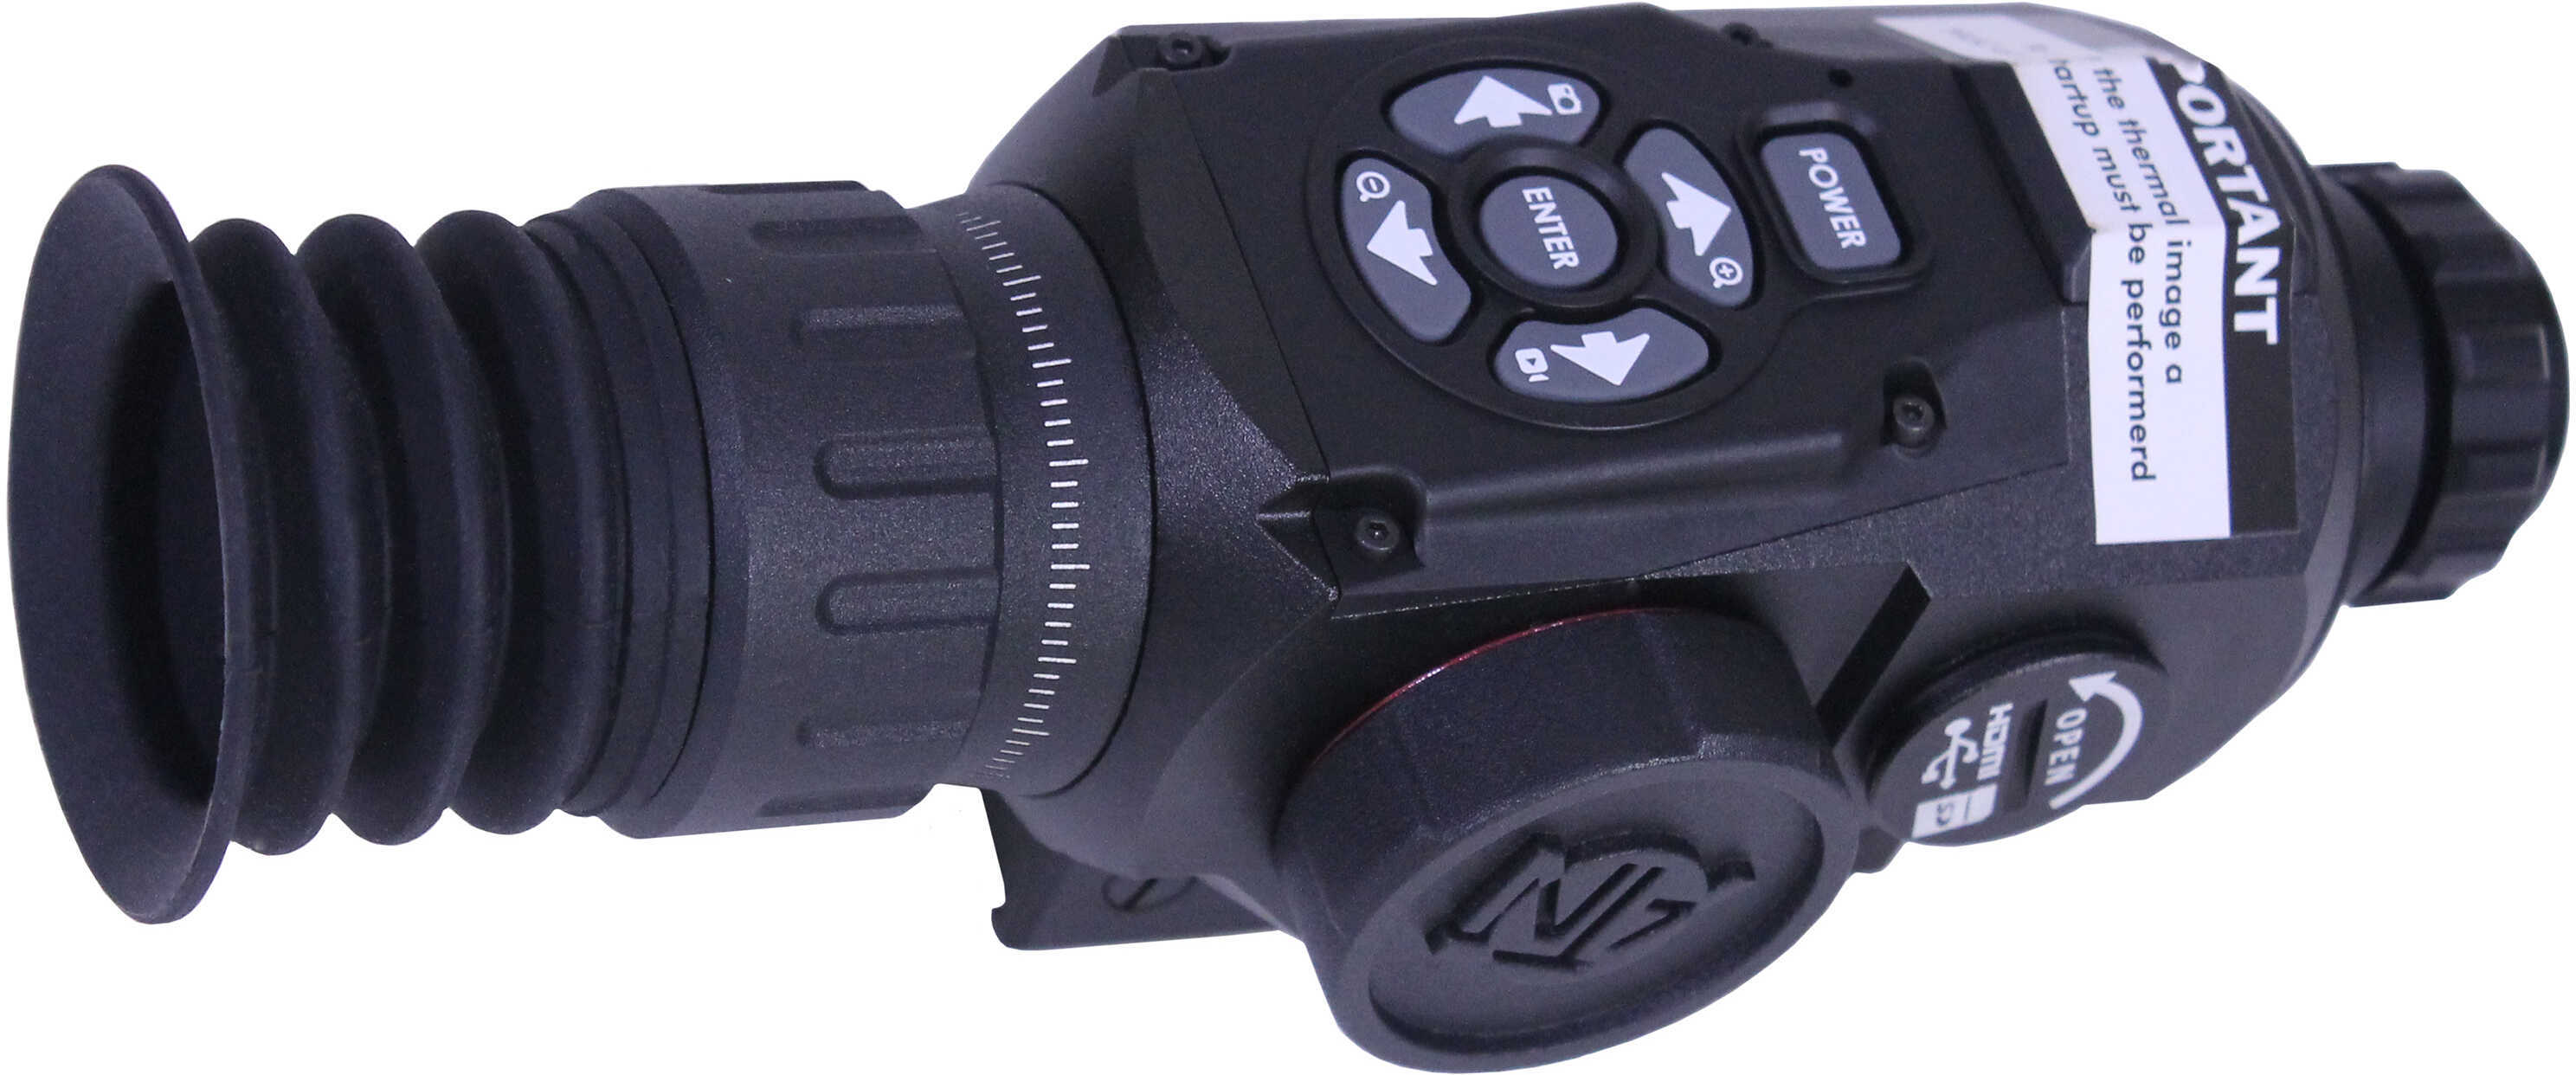 atn thermal smartscope reviews